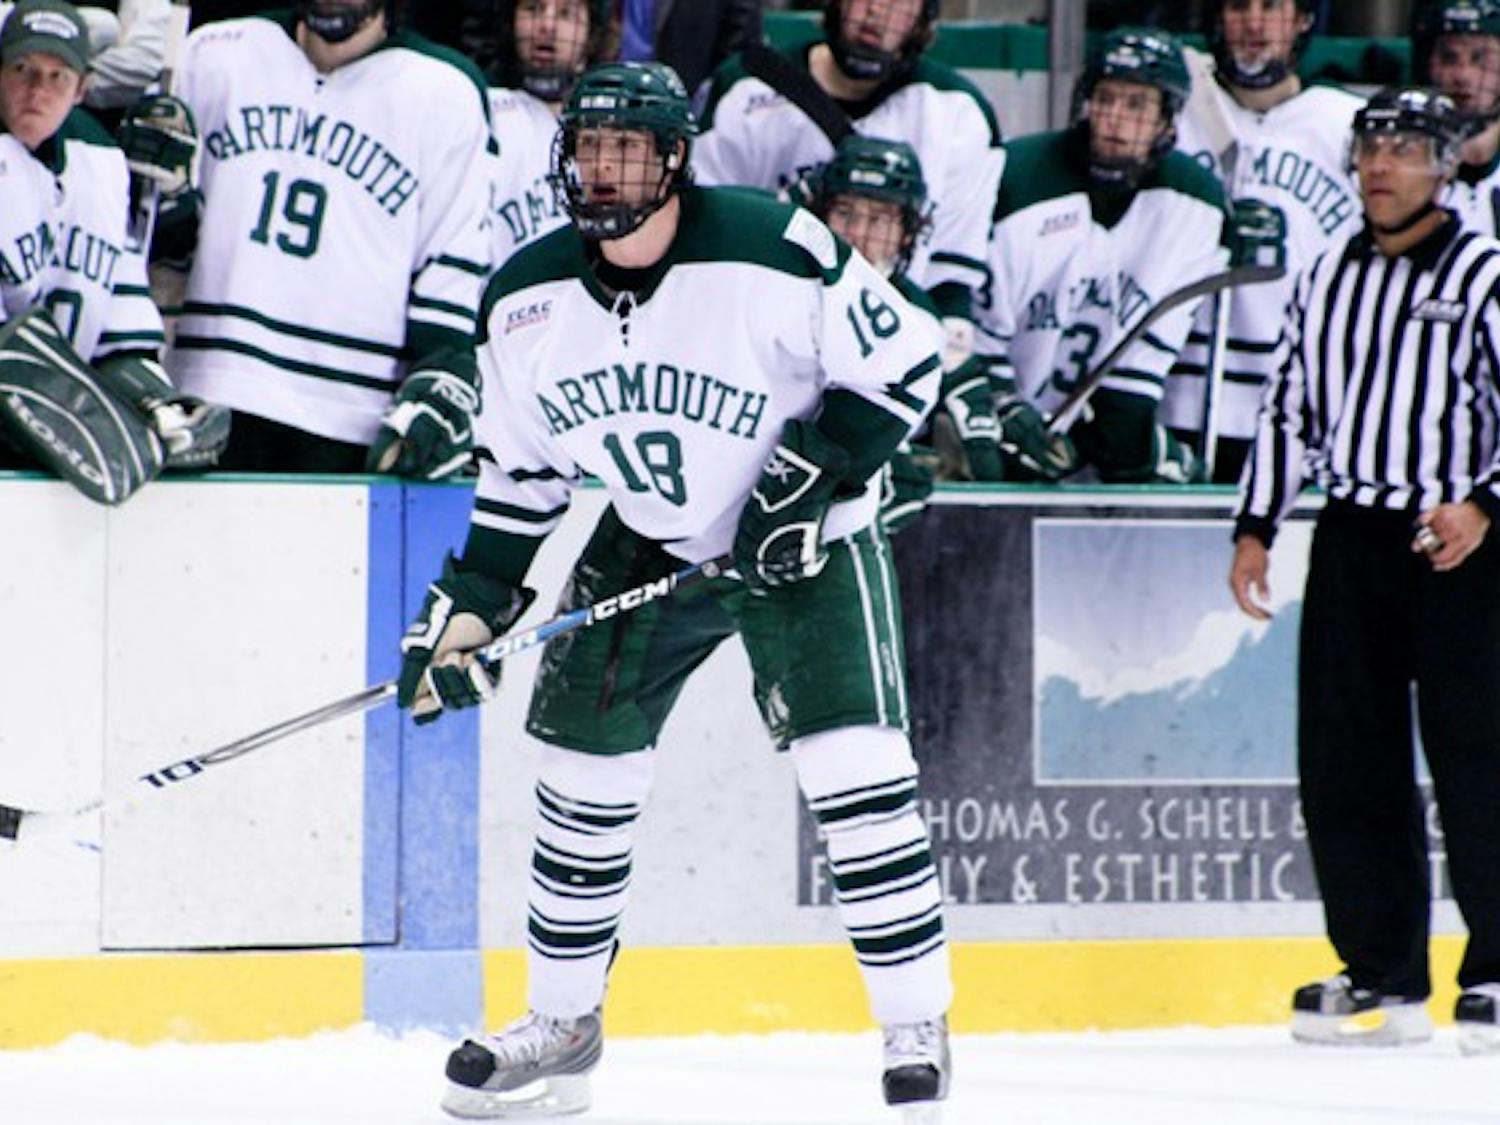 Three members of Dartmouth's 2009-2010 men's ice hockey team were picked in the 2009 NHL entry draft. Joe Stejskal '11, pictured here, was drafted by the Montreal Canadiens.